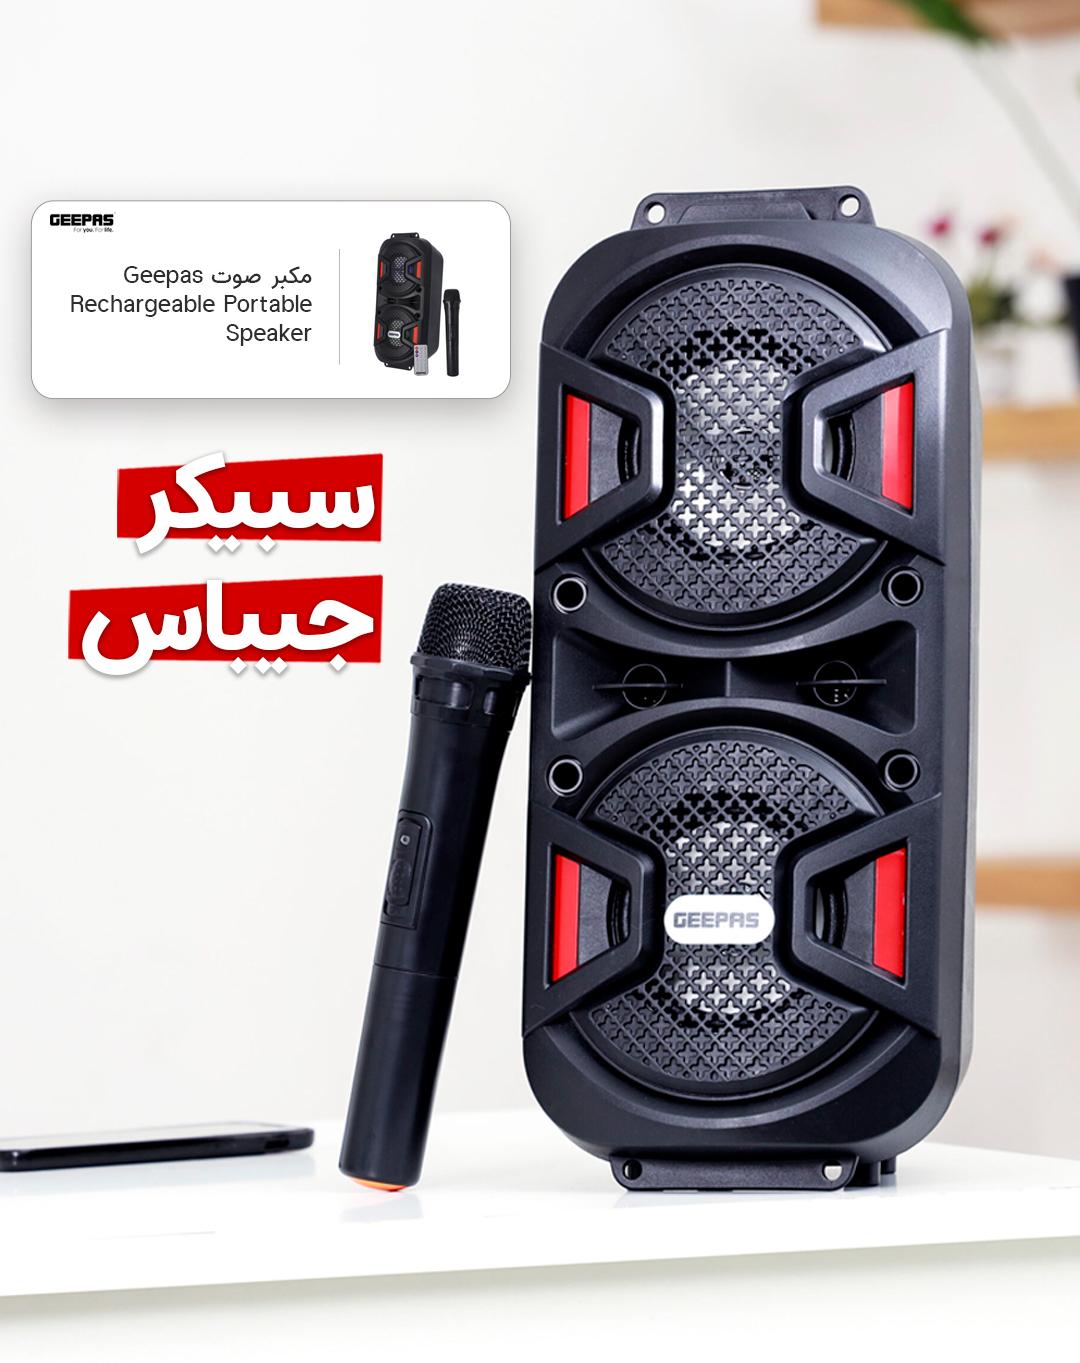 Geepas Rechargeable Portable Speaker - Portable Handle with 1500 MAH Huge Battery- TWS Connection & Compatible with BT/ USB/ AUX/ FM/ Micro SD - Ideal for Home, Hotels, Trips & Outdoor Use